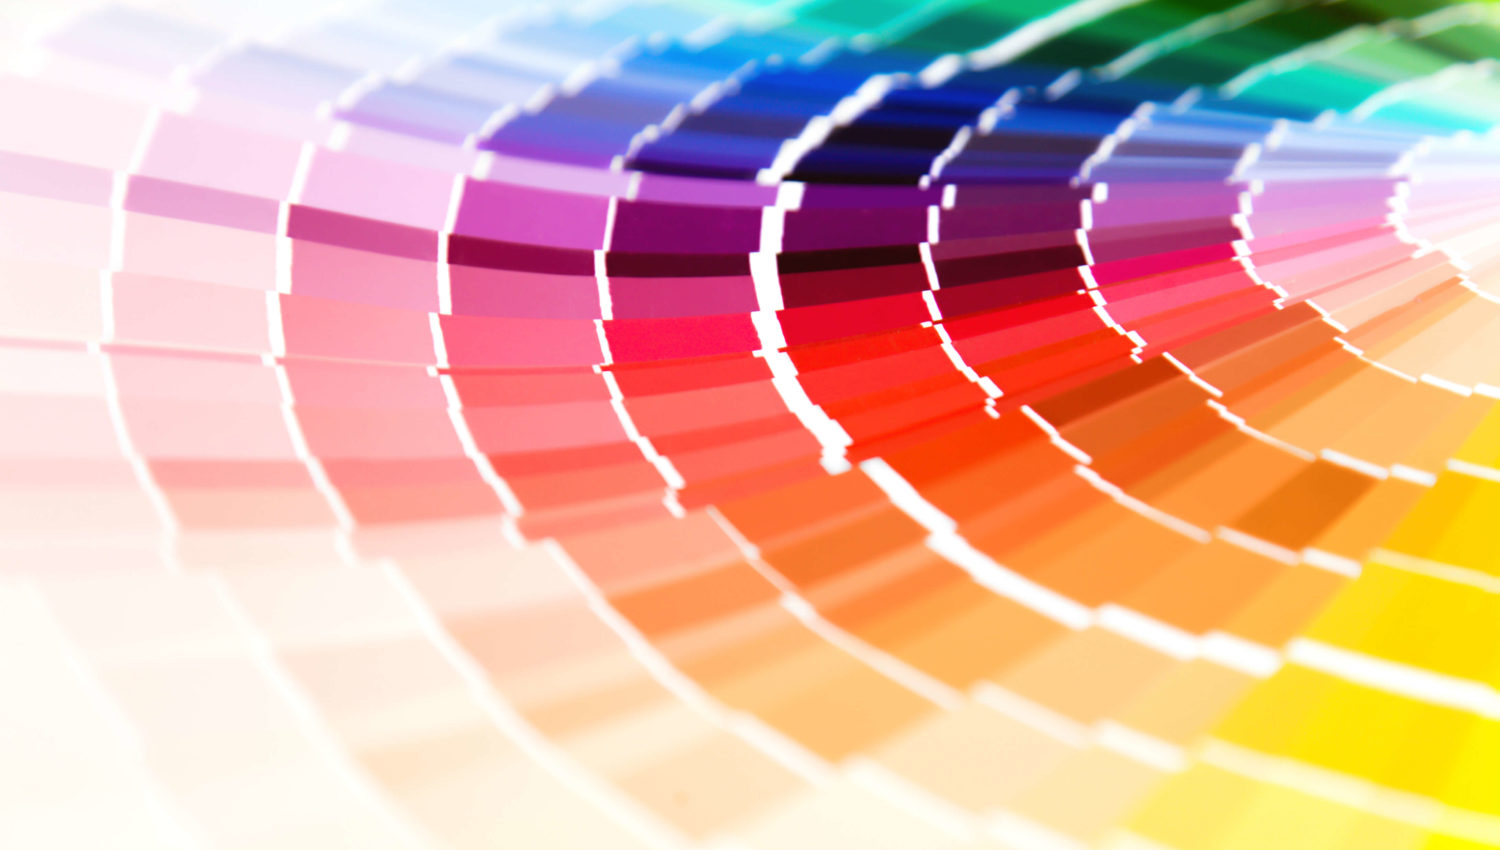 Pantone®/CMYK/RGB – What’s the difference?